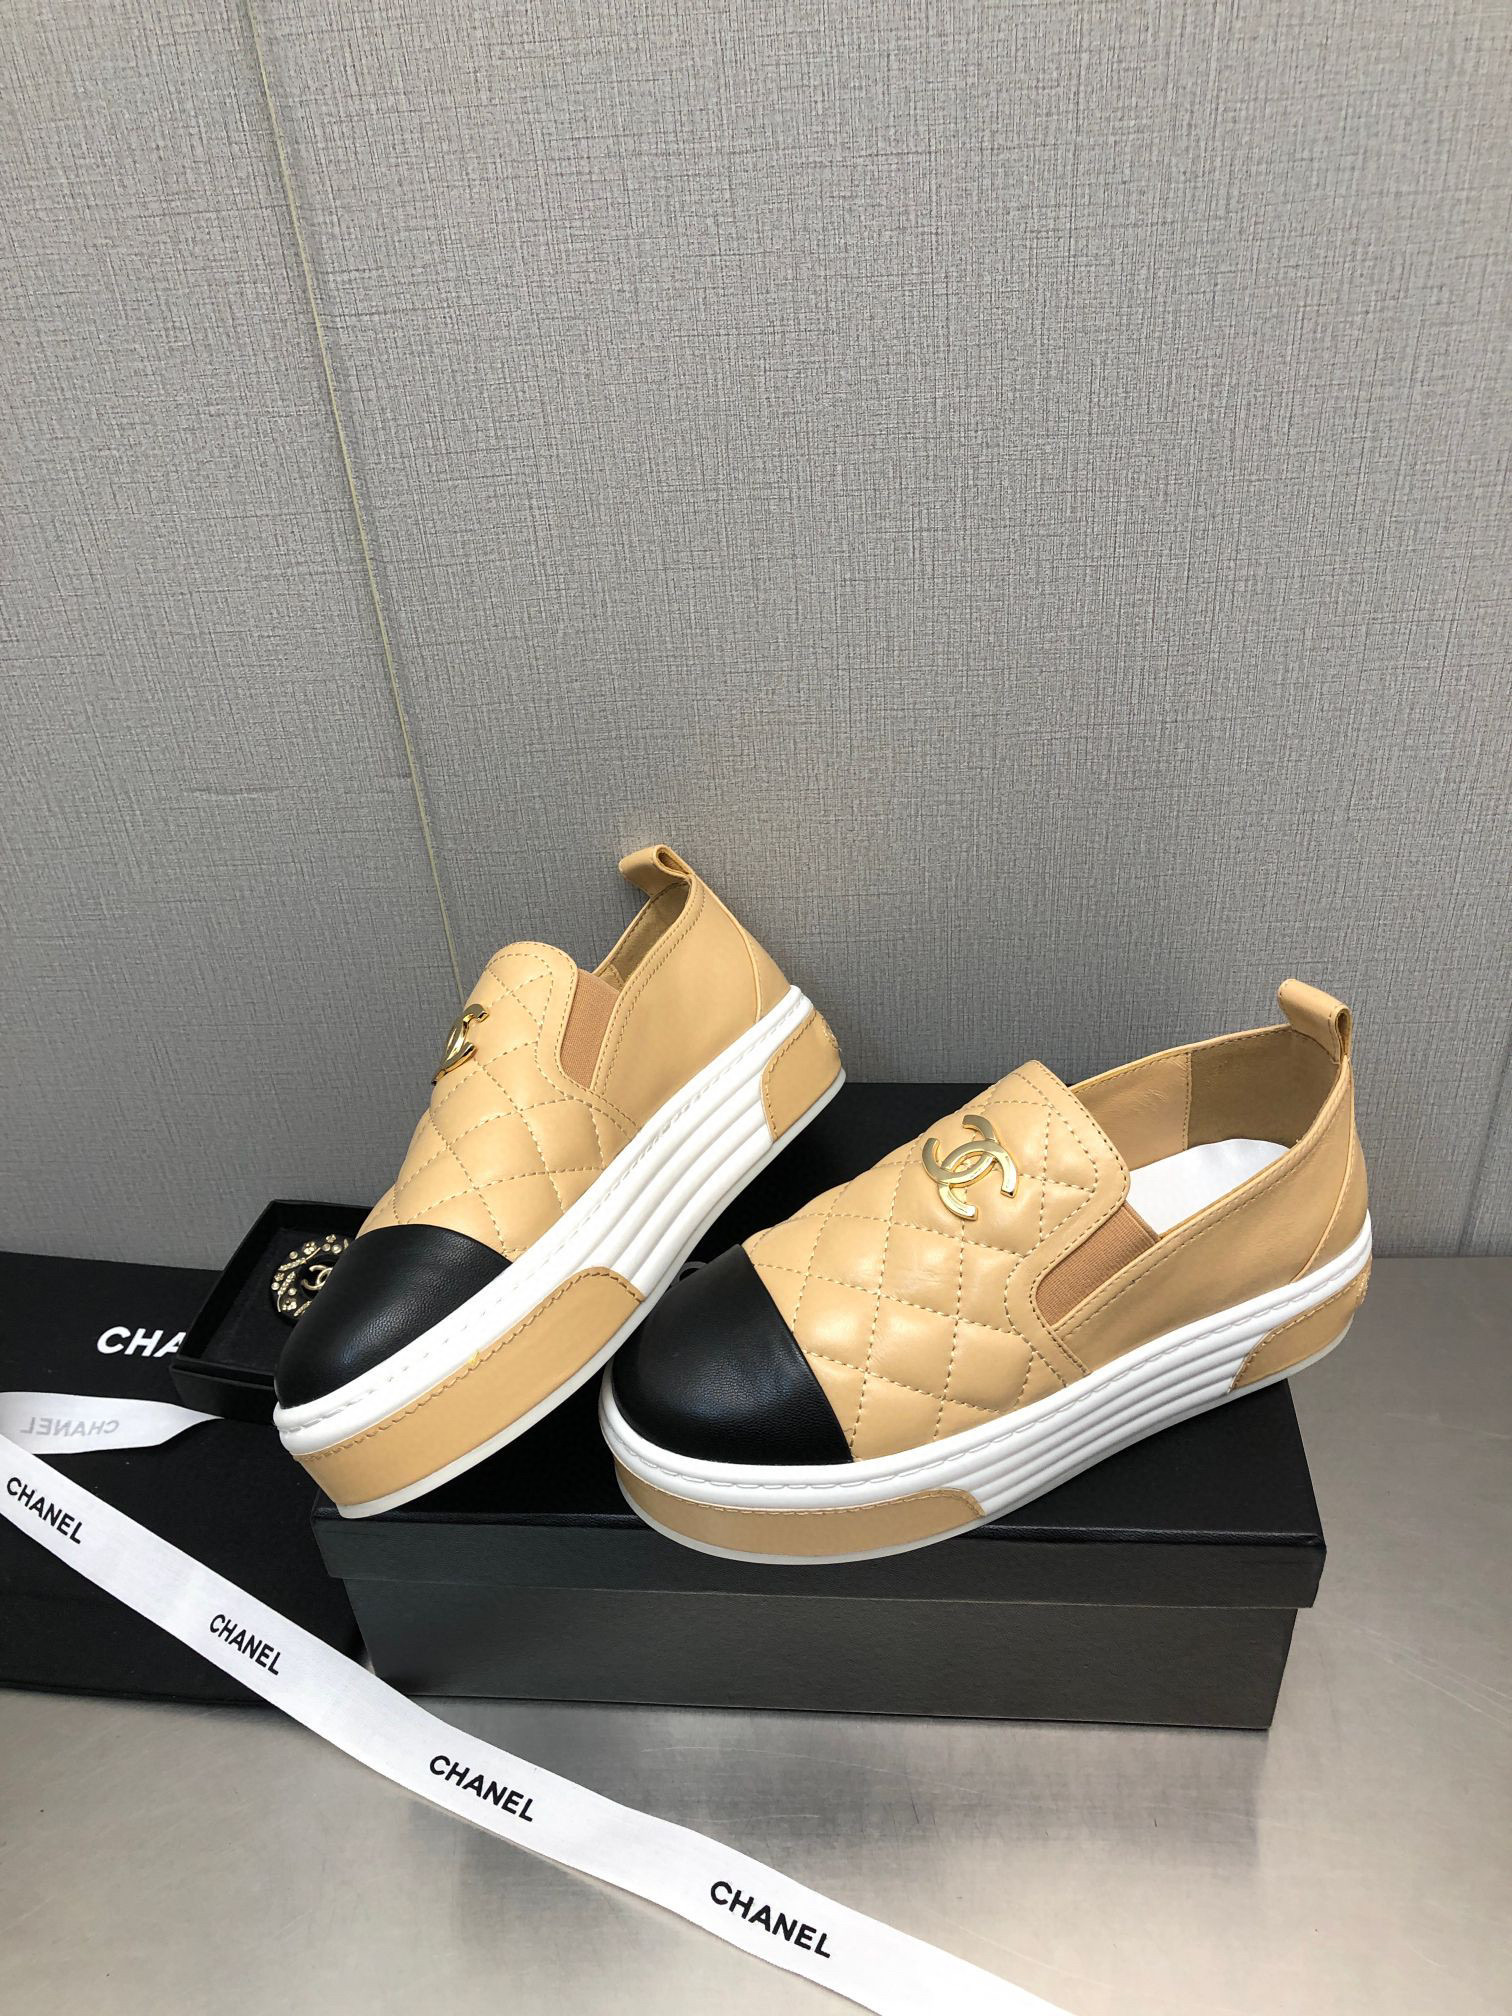 Authentic Second Hand Chanel Colourblock Slip On Sneakers PSS05100337   THE FIFTH COLLECTION